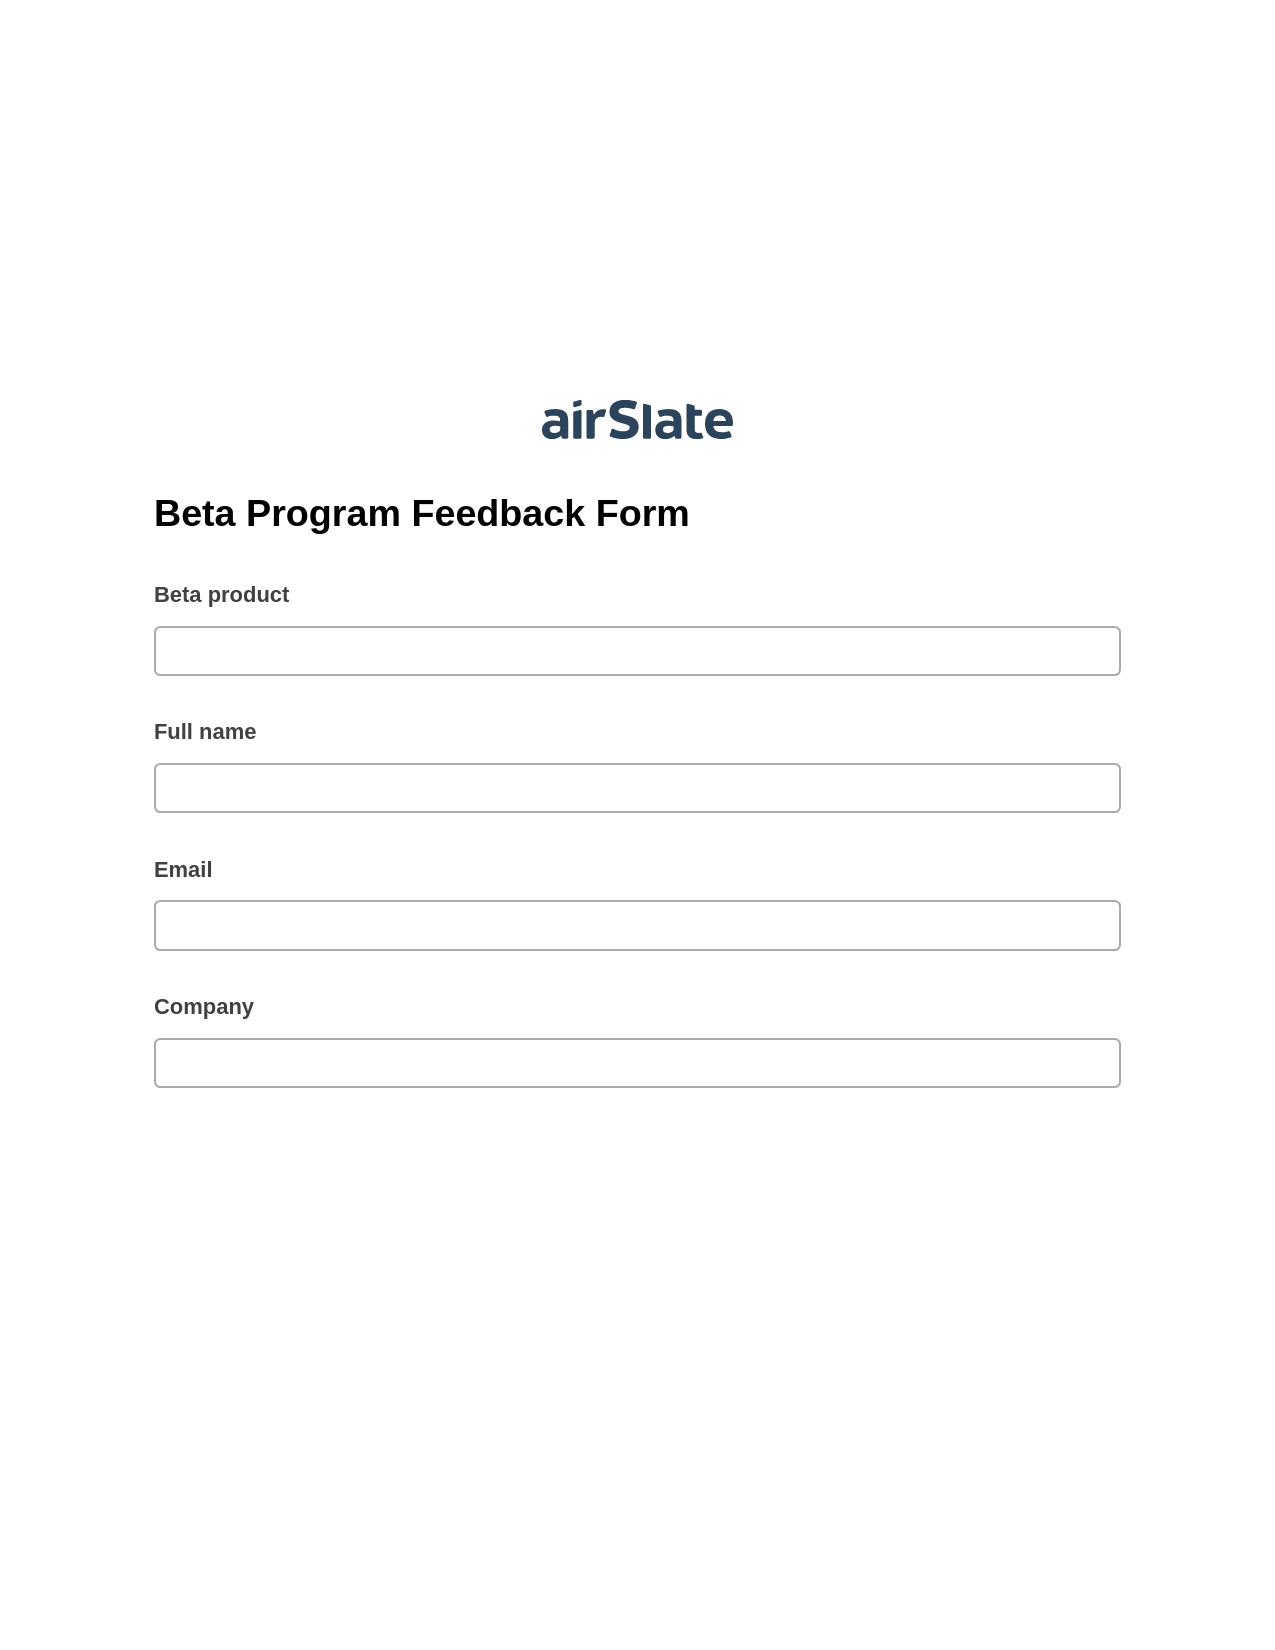 Beta Program Feedback Form Pre-fill from NetSuite Records Bot, Mailchimp add recipient to audience Bot, Archive to SharePoint Folder Bot